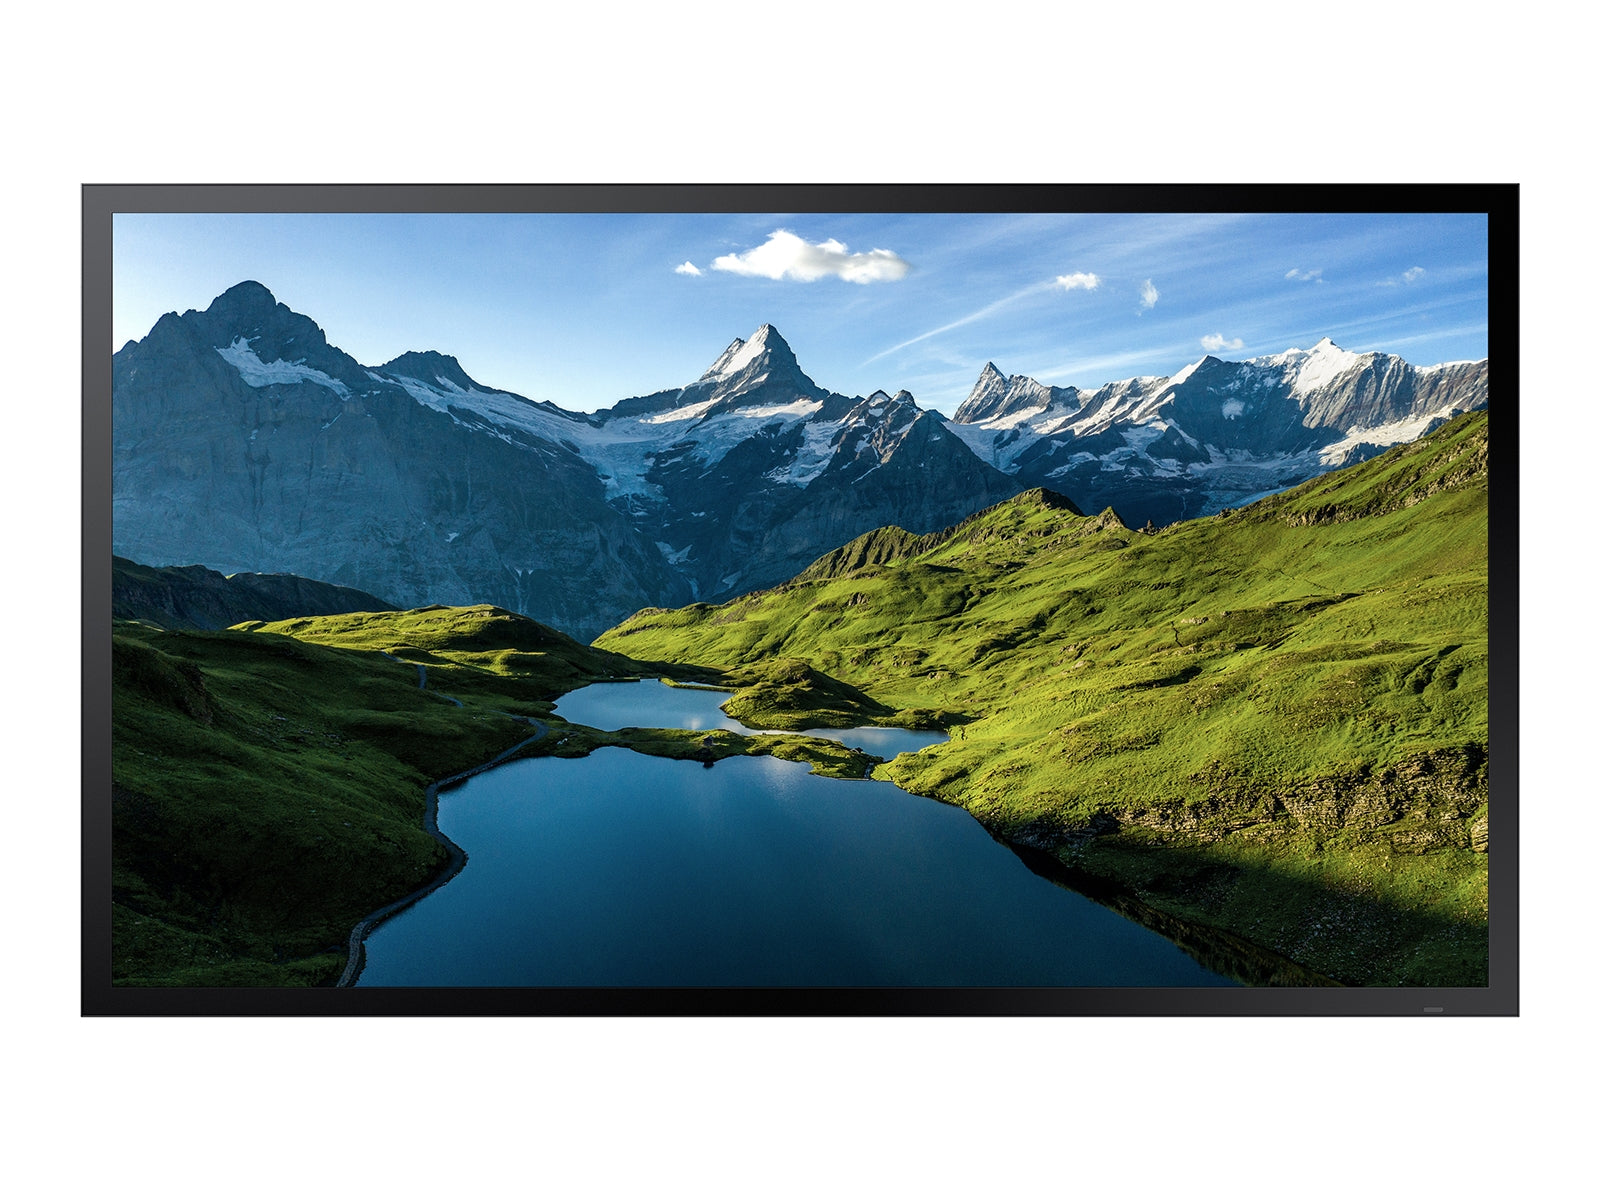 Samsung OH55A-S Digital Signage Display - 55" LCD - Vertical Alignment (VA) - 24 Hours/7 Days Operation